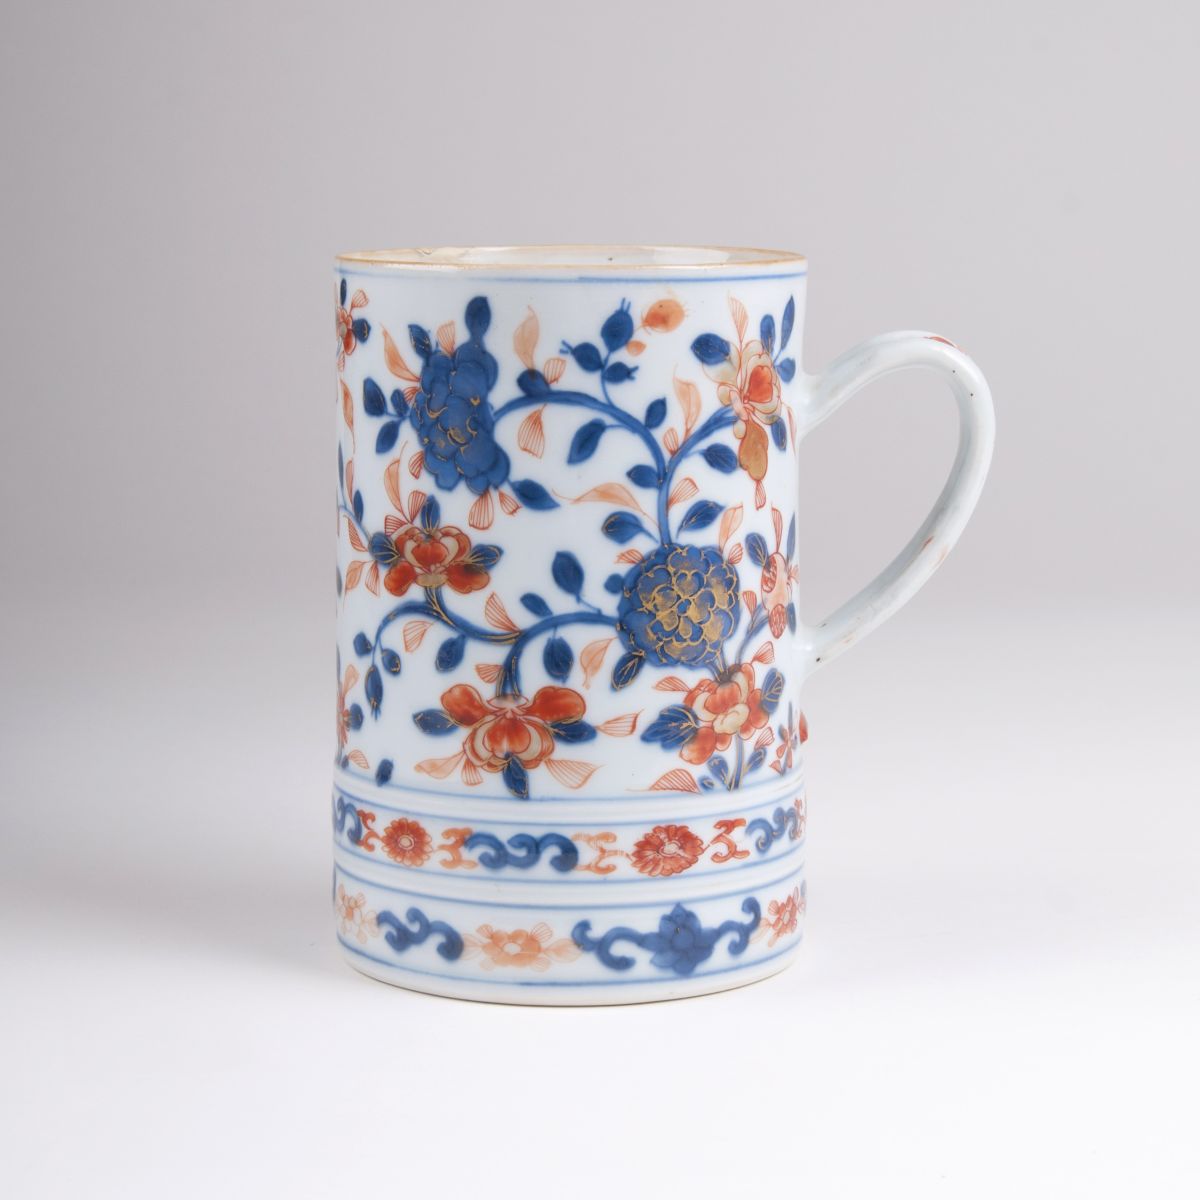 A Jug with Flower Tendrils